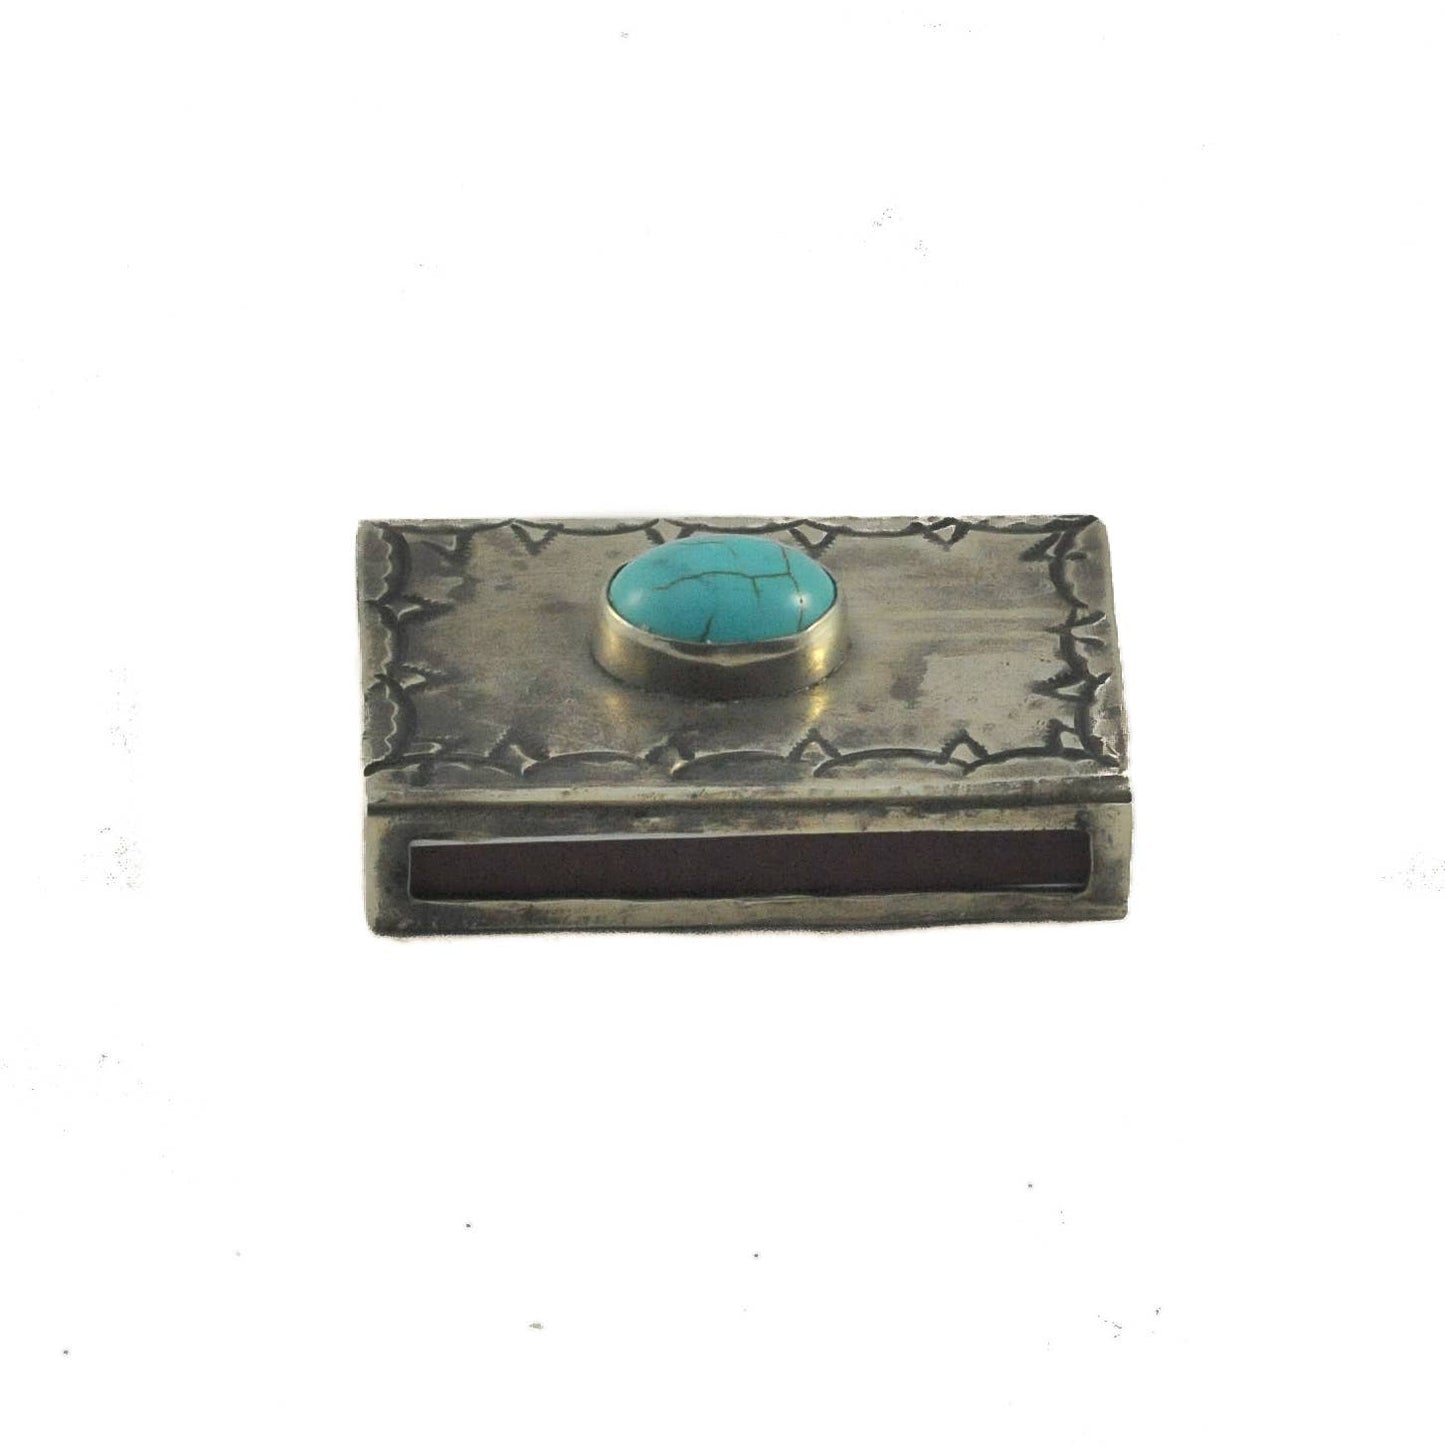 Small Stamped Matchbox with Turquoise